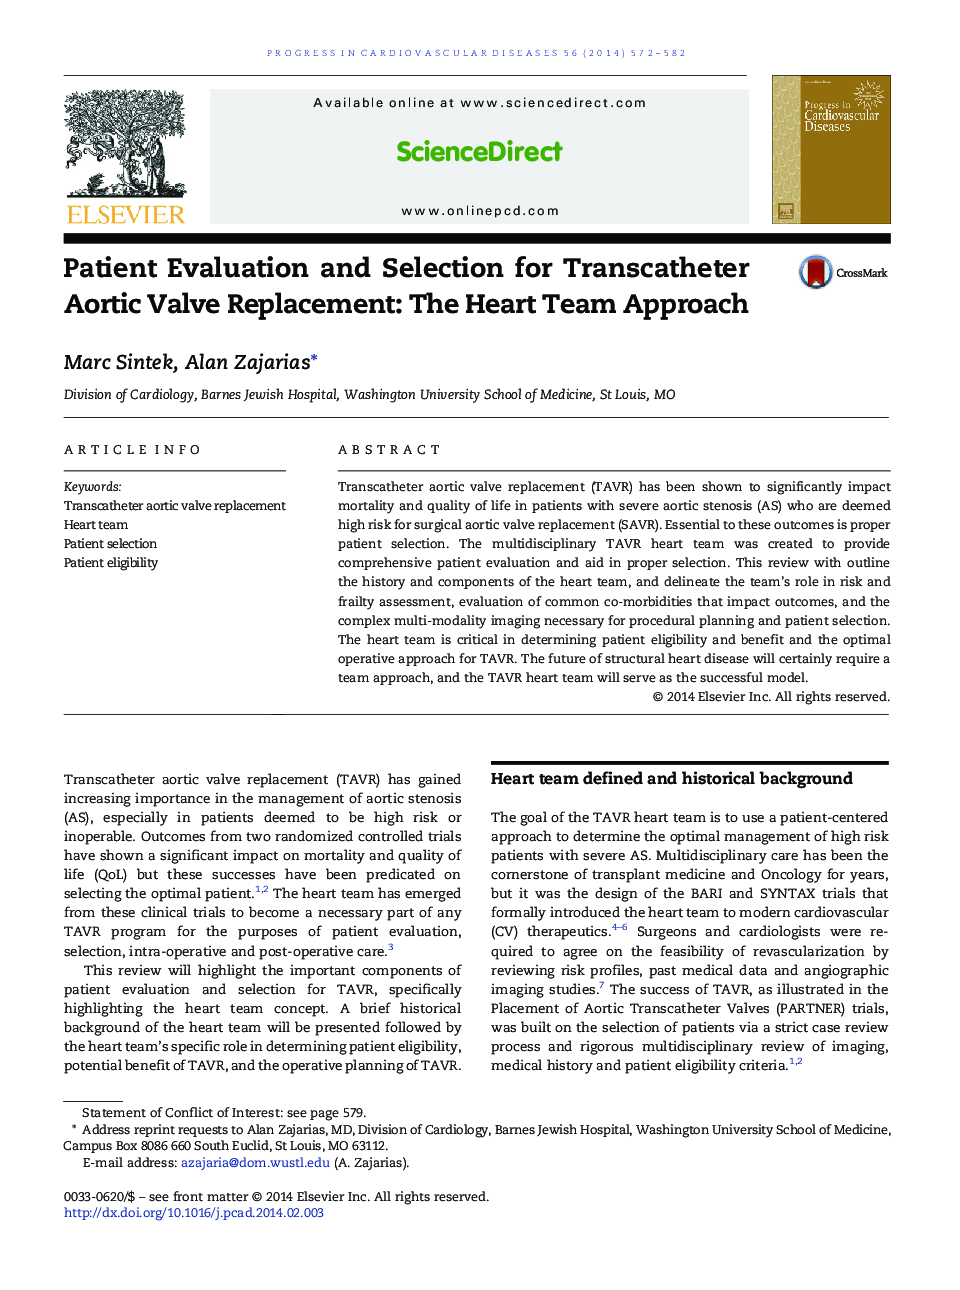 Patient Evaluation and Selection for Transcatheter Aortic Valve Replacement: The Heart Team Approach 